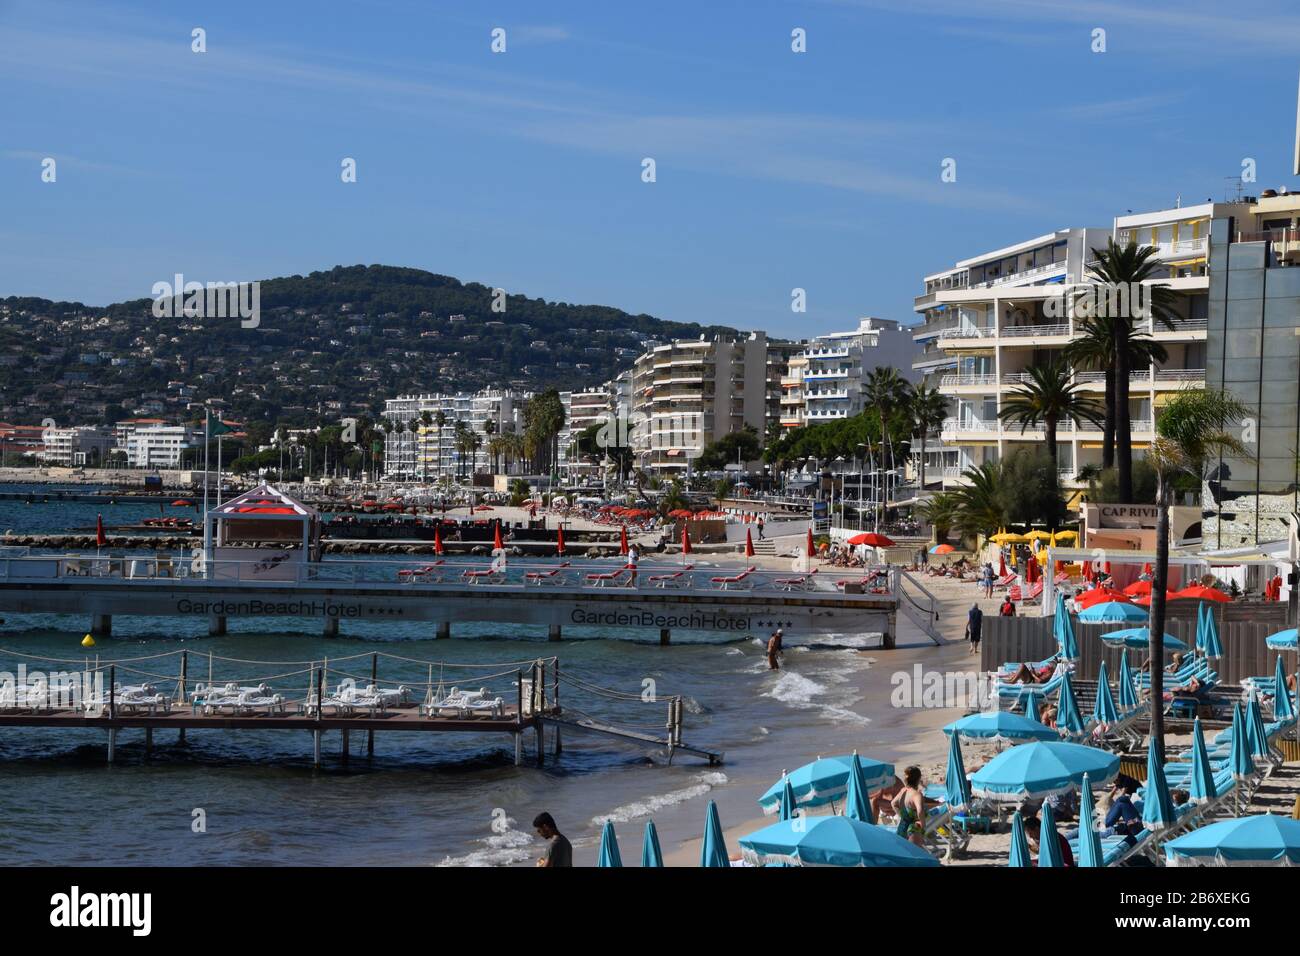 Beach and promenade in Juan Les Pins, South of France Stock Photo